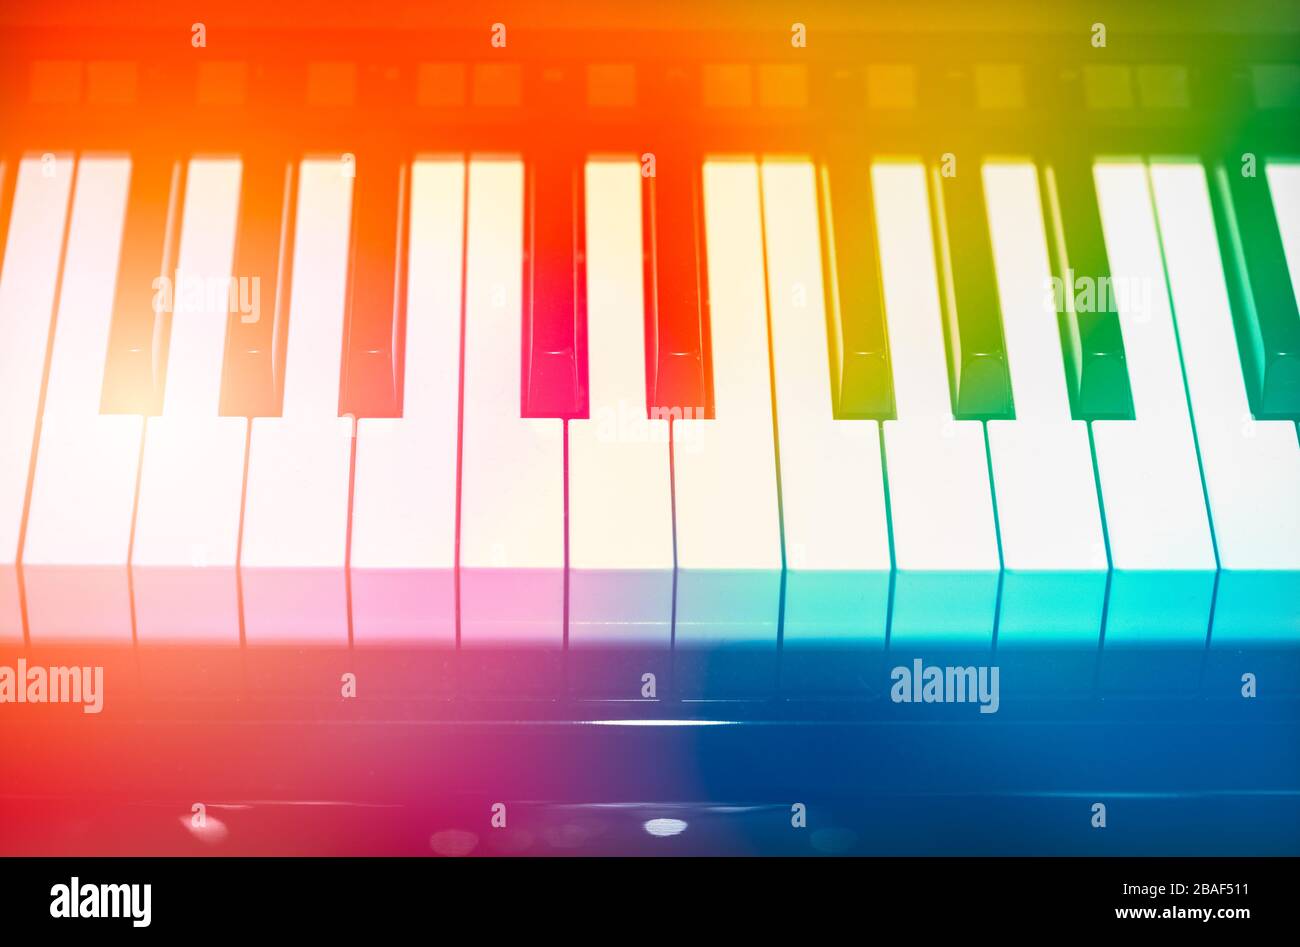 colorful piano keyboard musical note pad for creative music education fun school poster background. Stock Photo